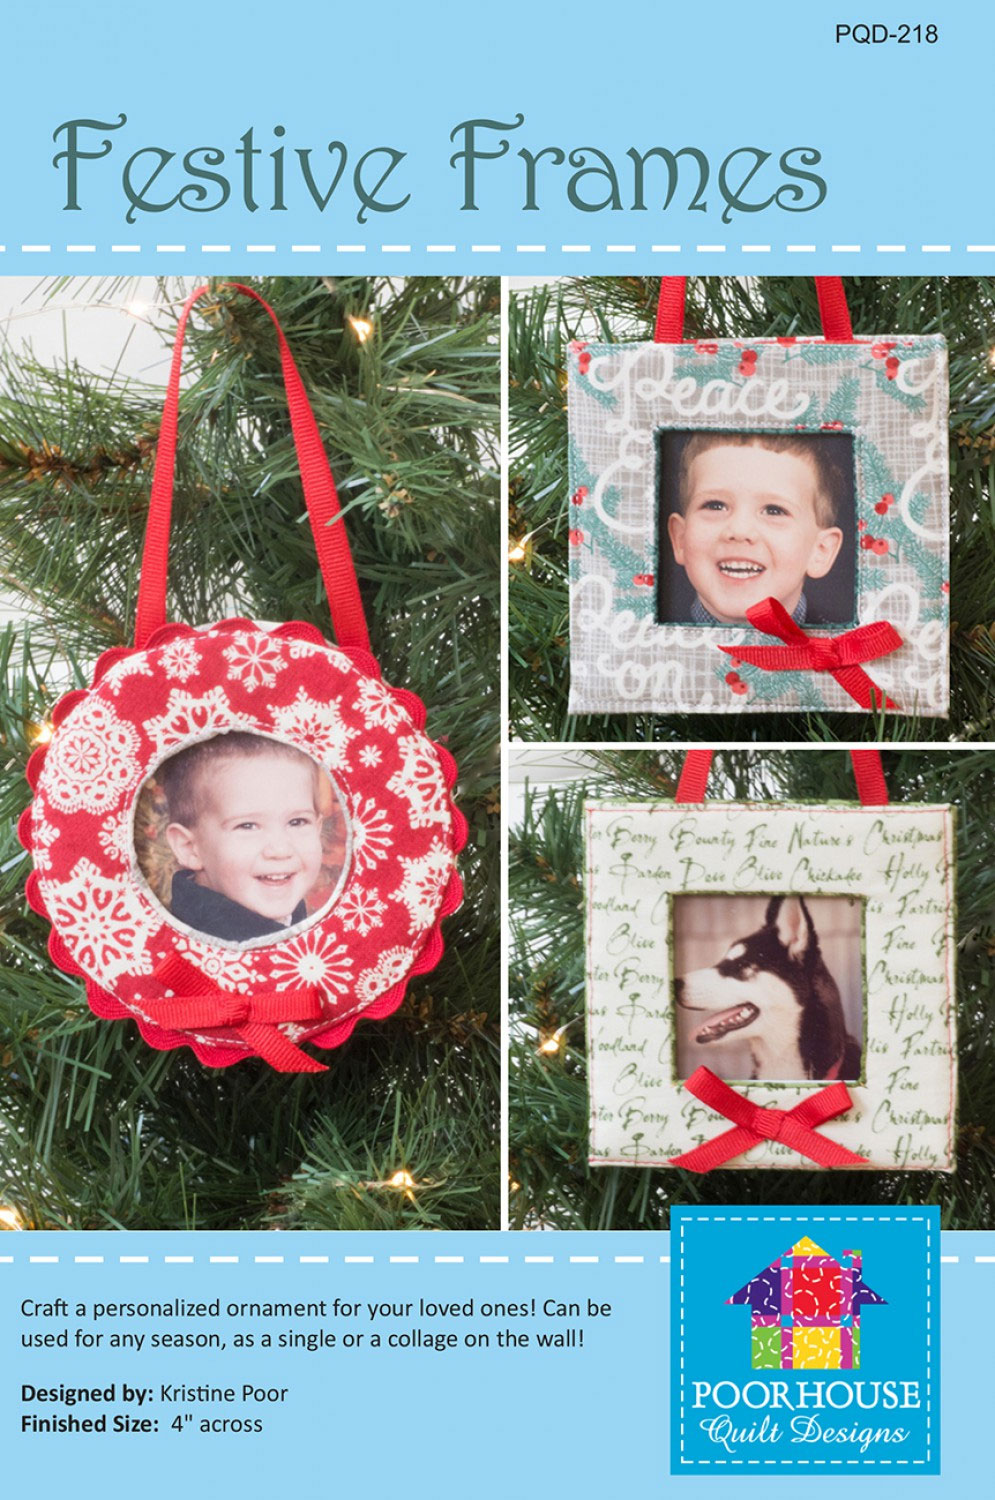 Festive-Frames-sewing-pattern-Poorhouse-Designs-front